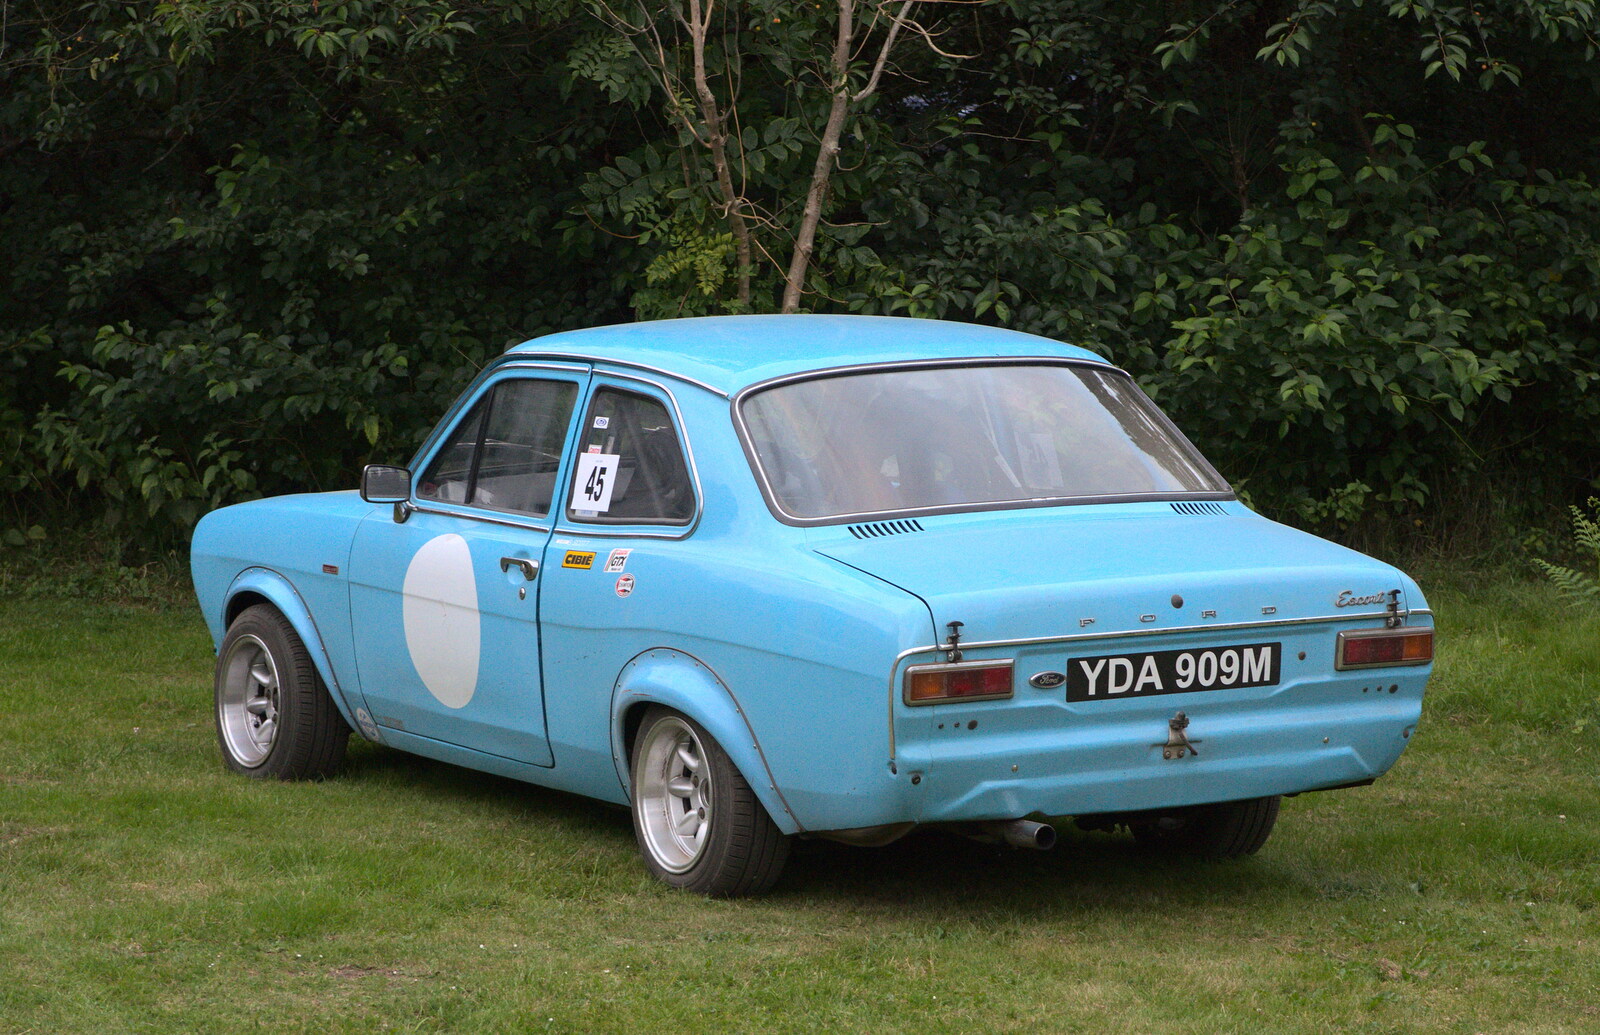 Next door there's a cool old Mark 1 Ford Escort from A Weekend in the Camper Van, West Harling, Norfolk - 21st June 2014